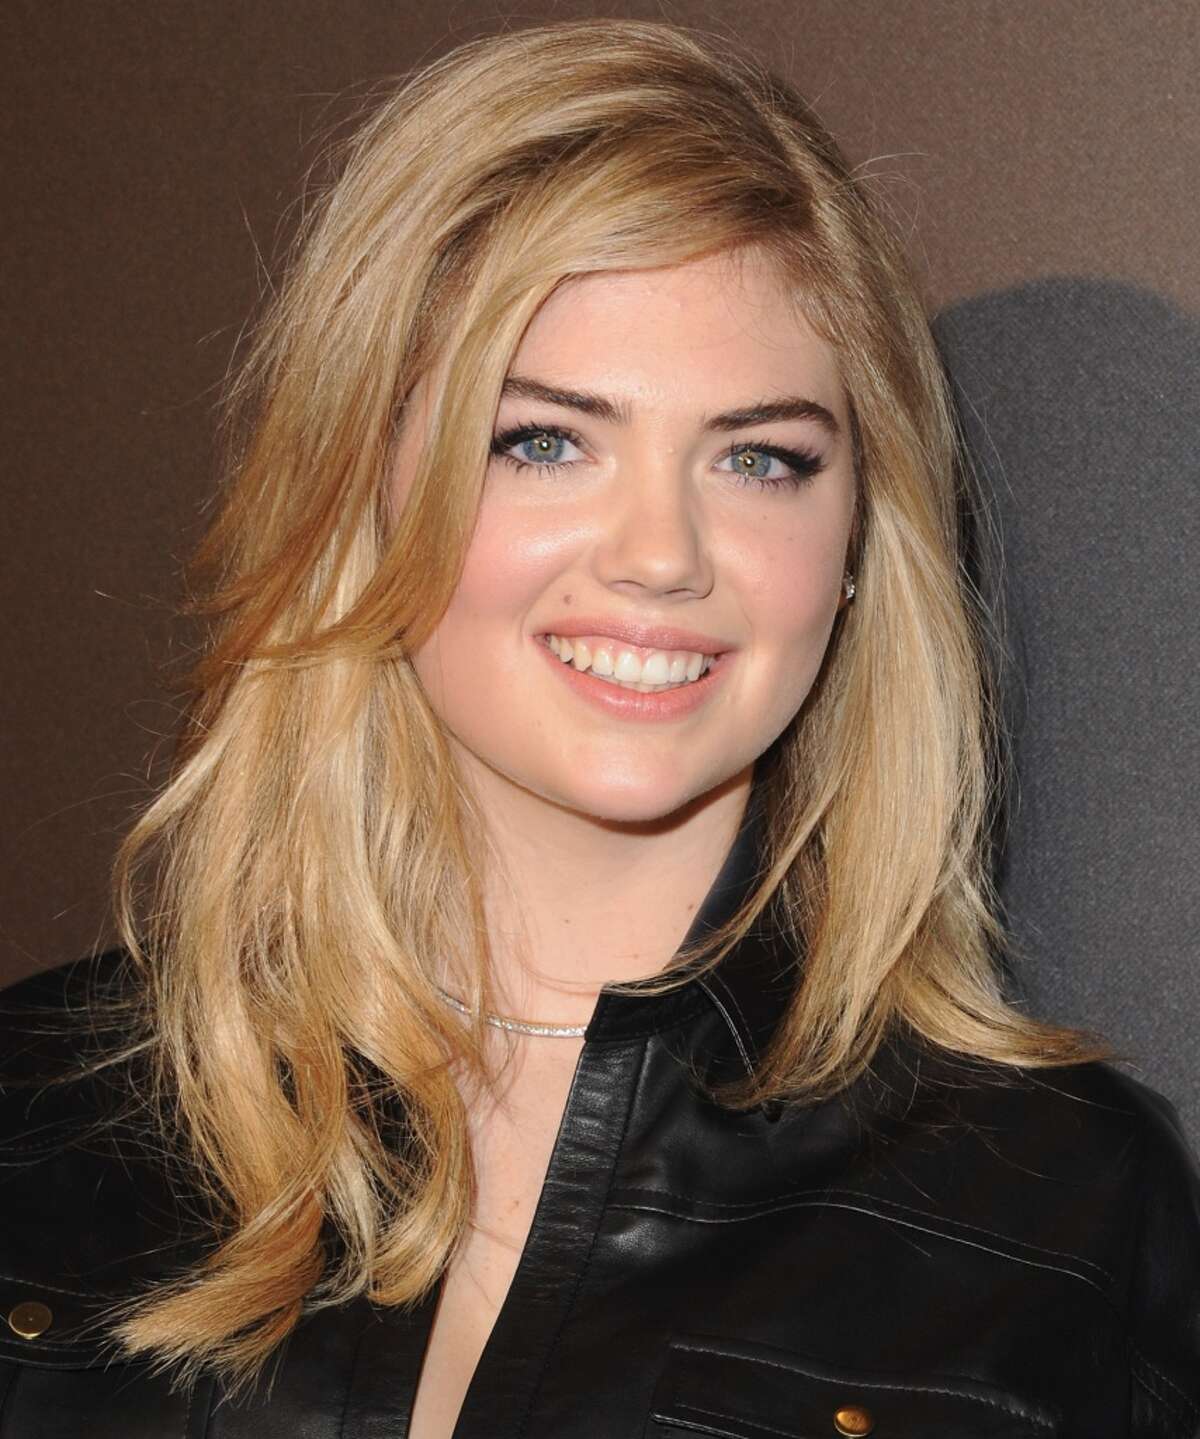 Kate Upton was named People Magazine's "Sexiest Woman Alive" at the magazine's awards party at The Beverly Hilton Hotel on December 18, 2014. Here's a look at Kate Upton's many looks over the years. (Photo by Jon Kopaloff/FilmMagic)